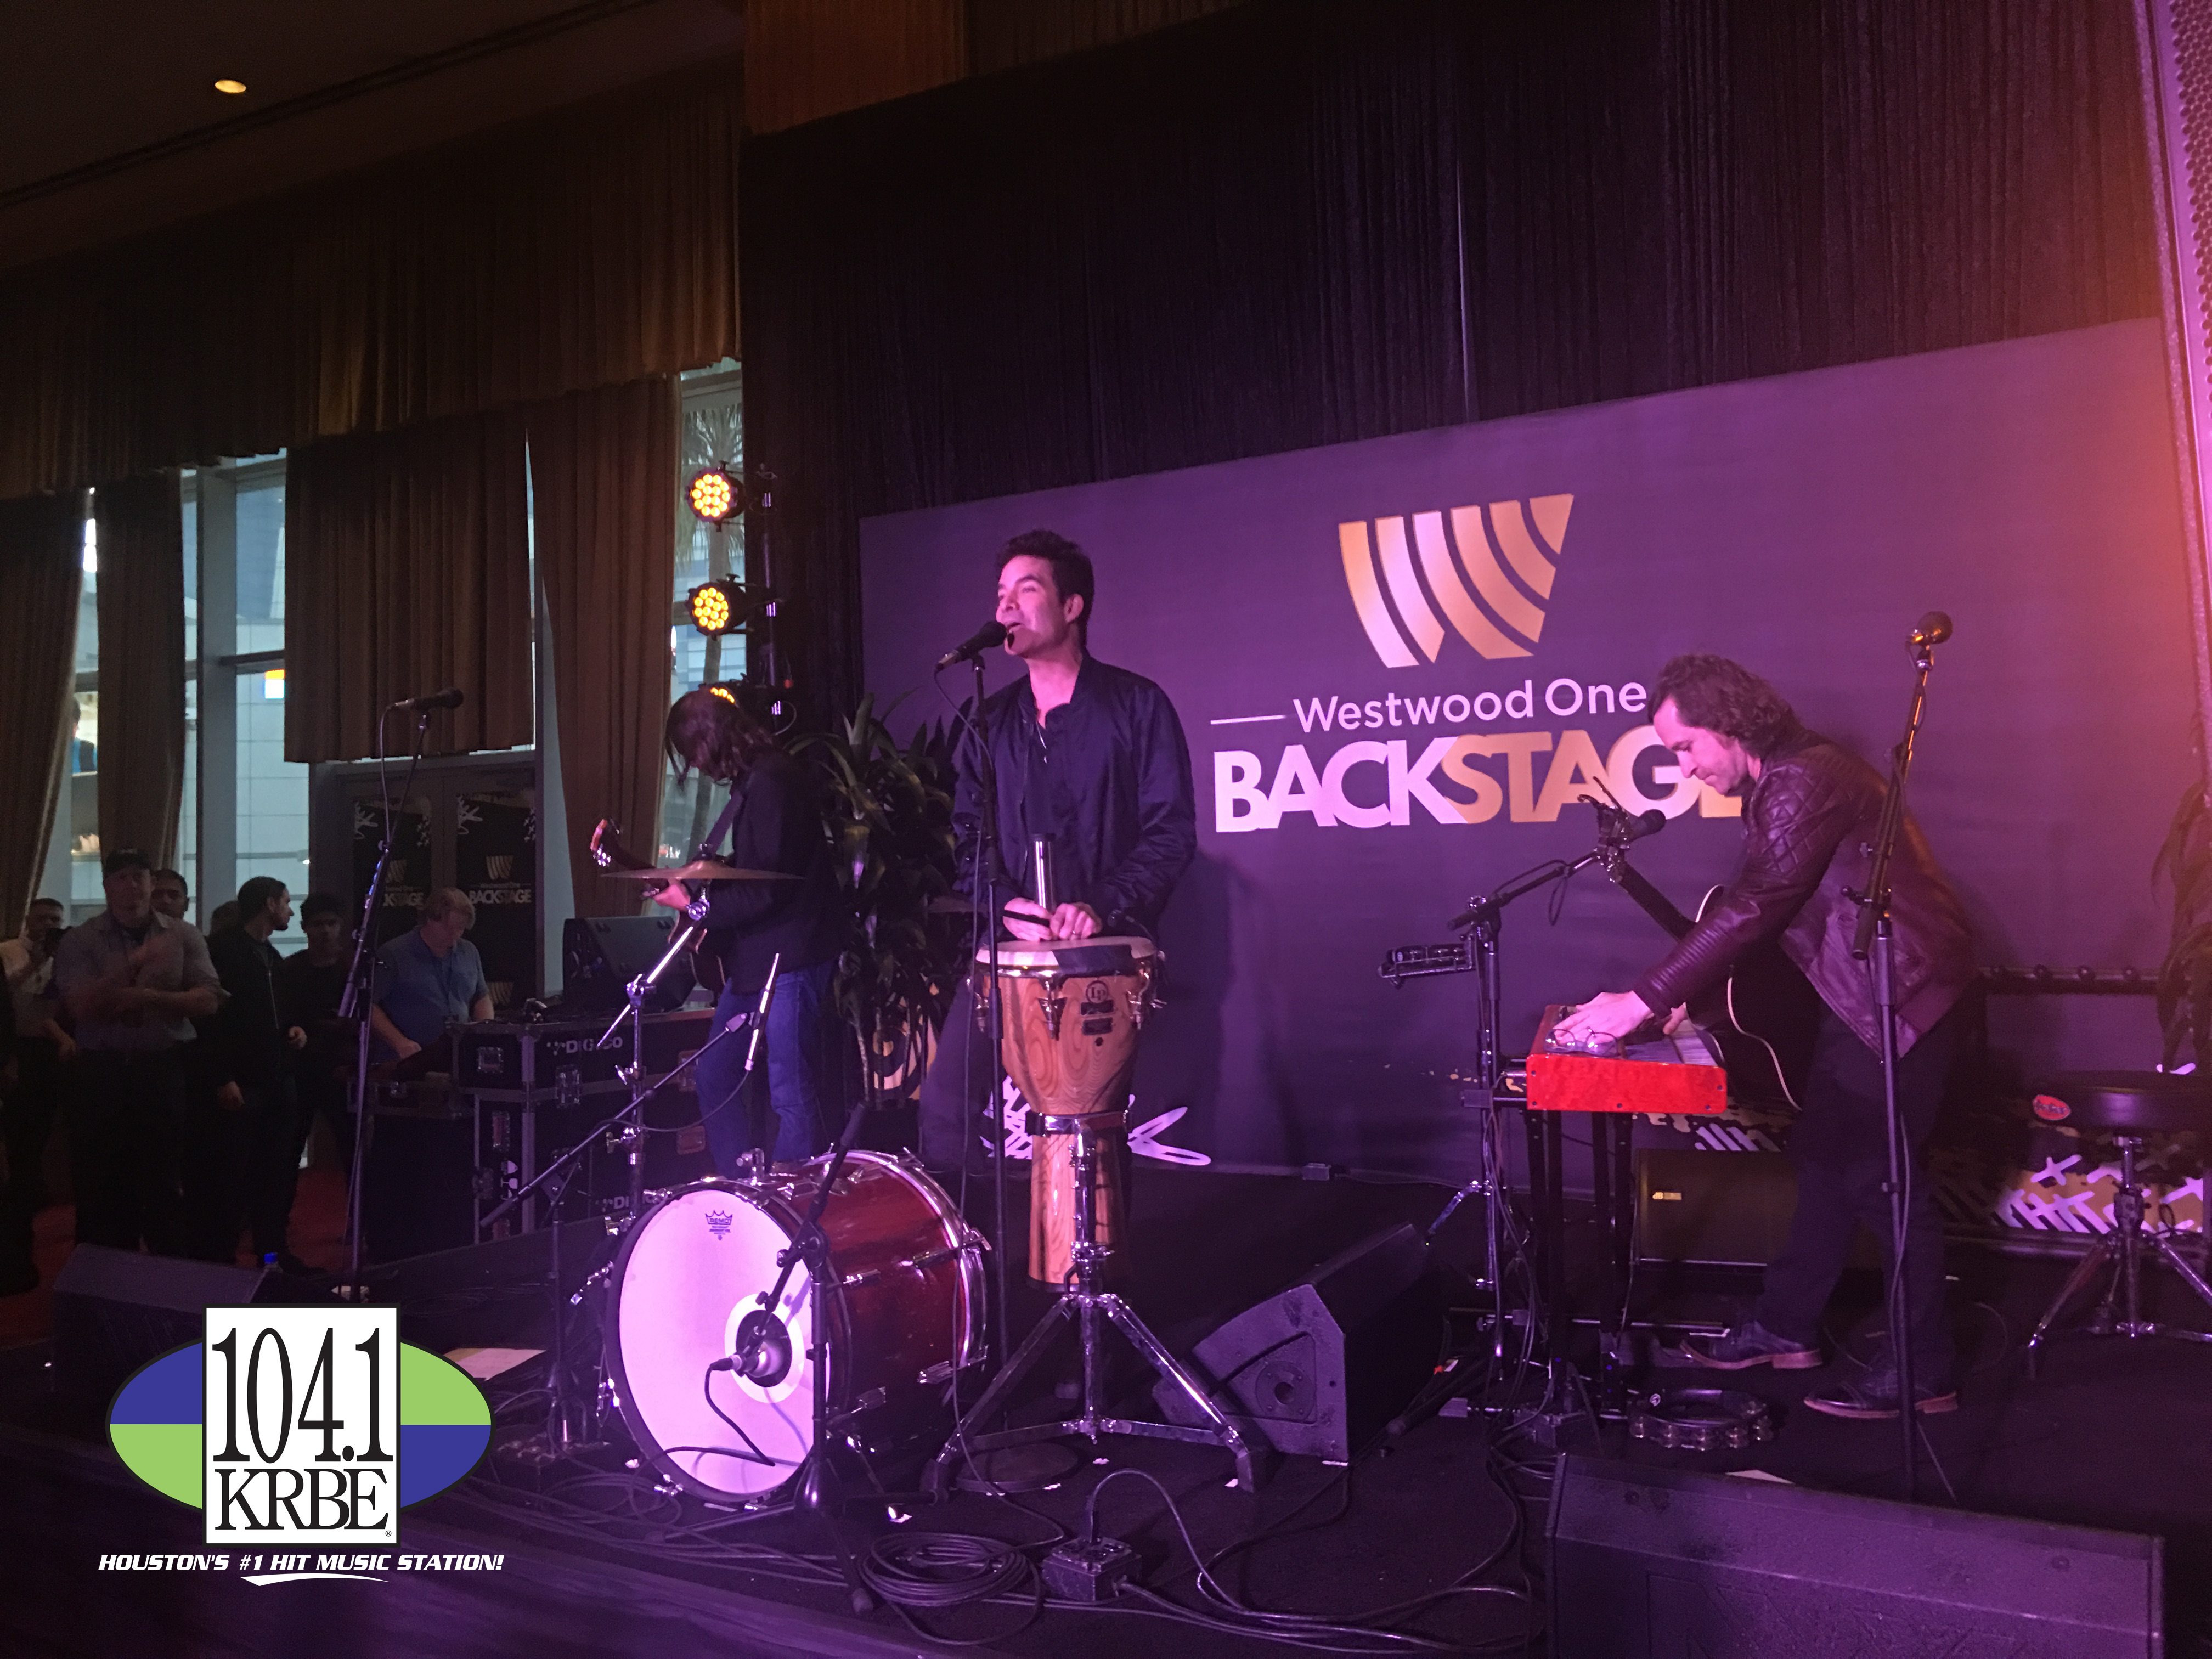 PHOTO: Train performs backstage for Radio Row attendees. Photo courtesy of E.J. Santillan and 104.1 KRBE.